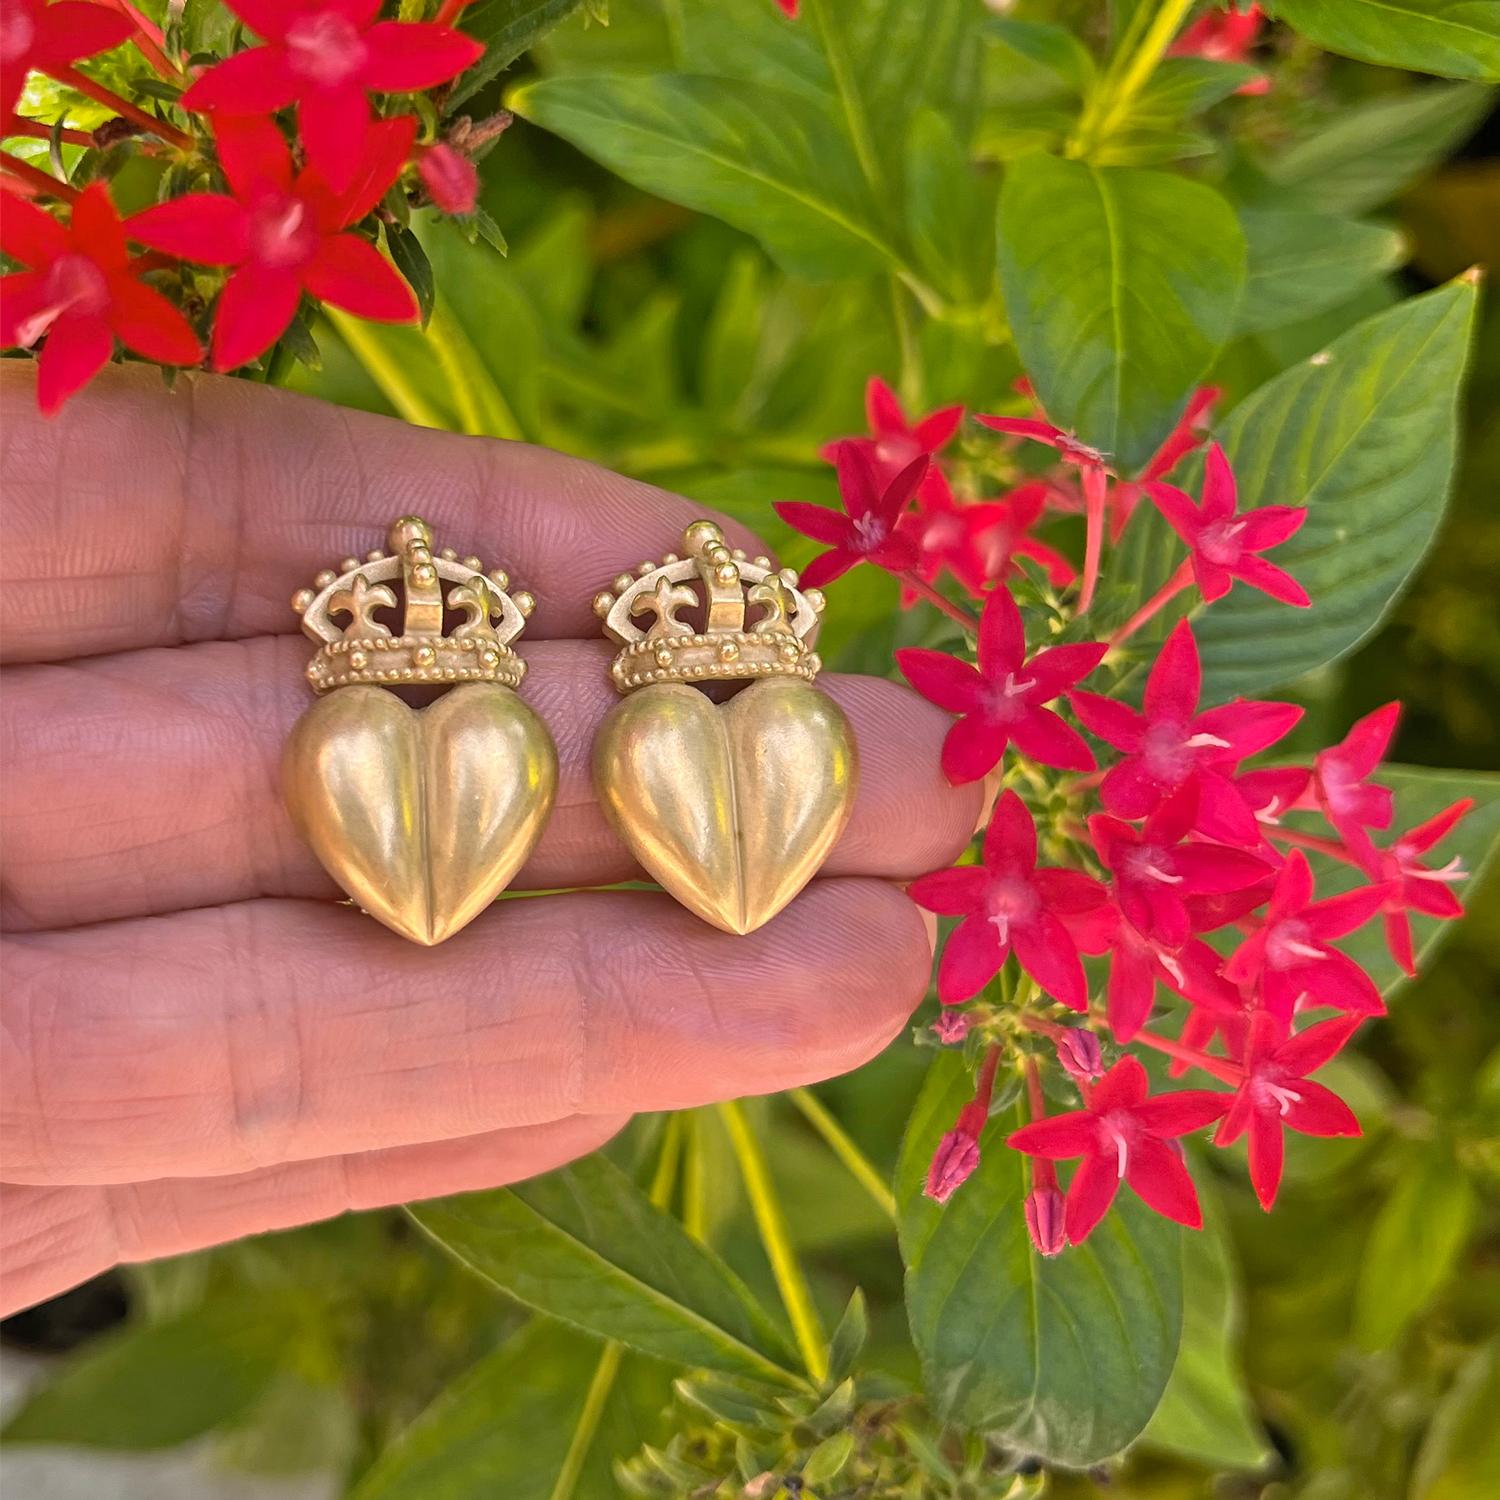 Kieselstein-Cord 18-karat yellow gold iconic crowned heart earrings. Dating back to 1987, these earrings feature a unique heart-shaped bottom section with an open crown motif on top, all adorned with a luxurious satin finish. 

Measuring 1.16 inches